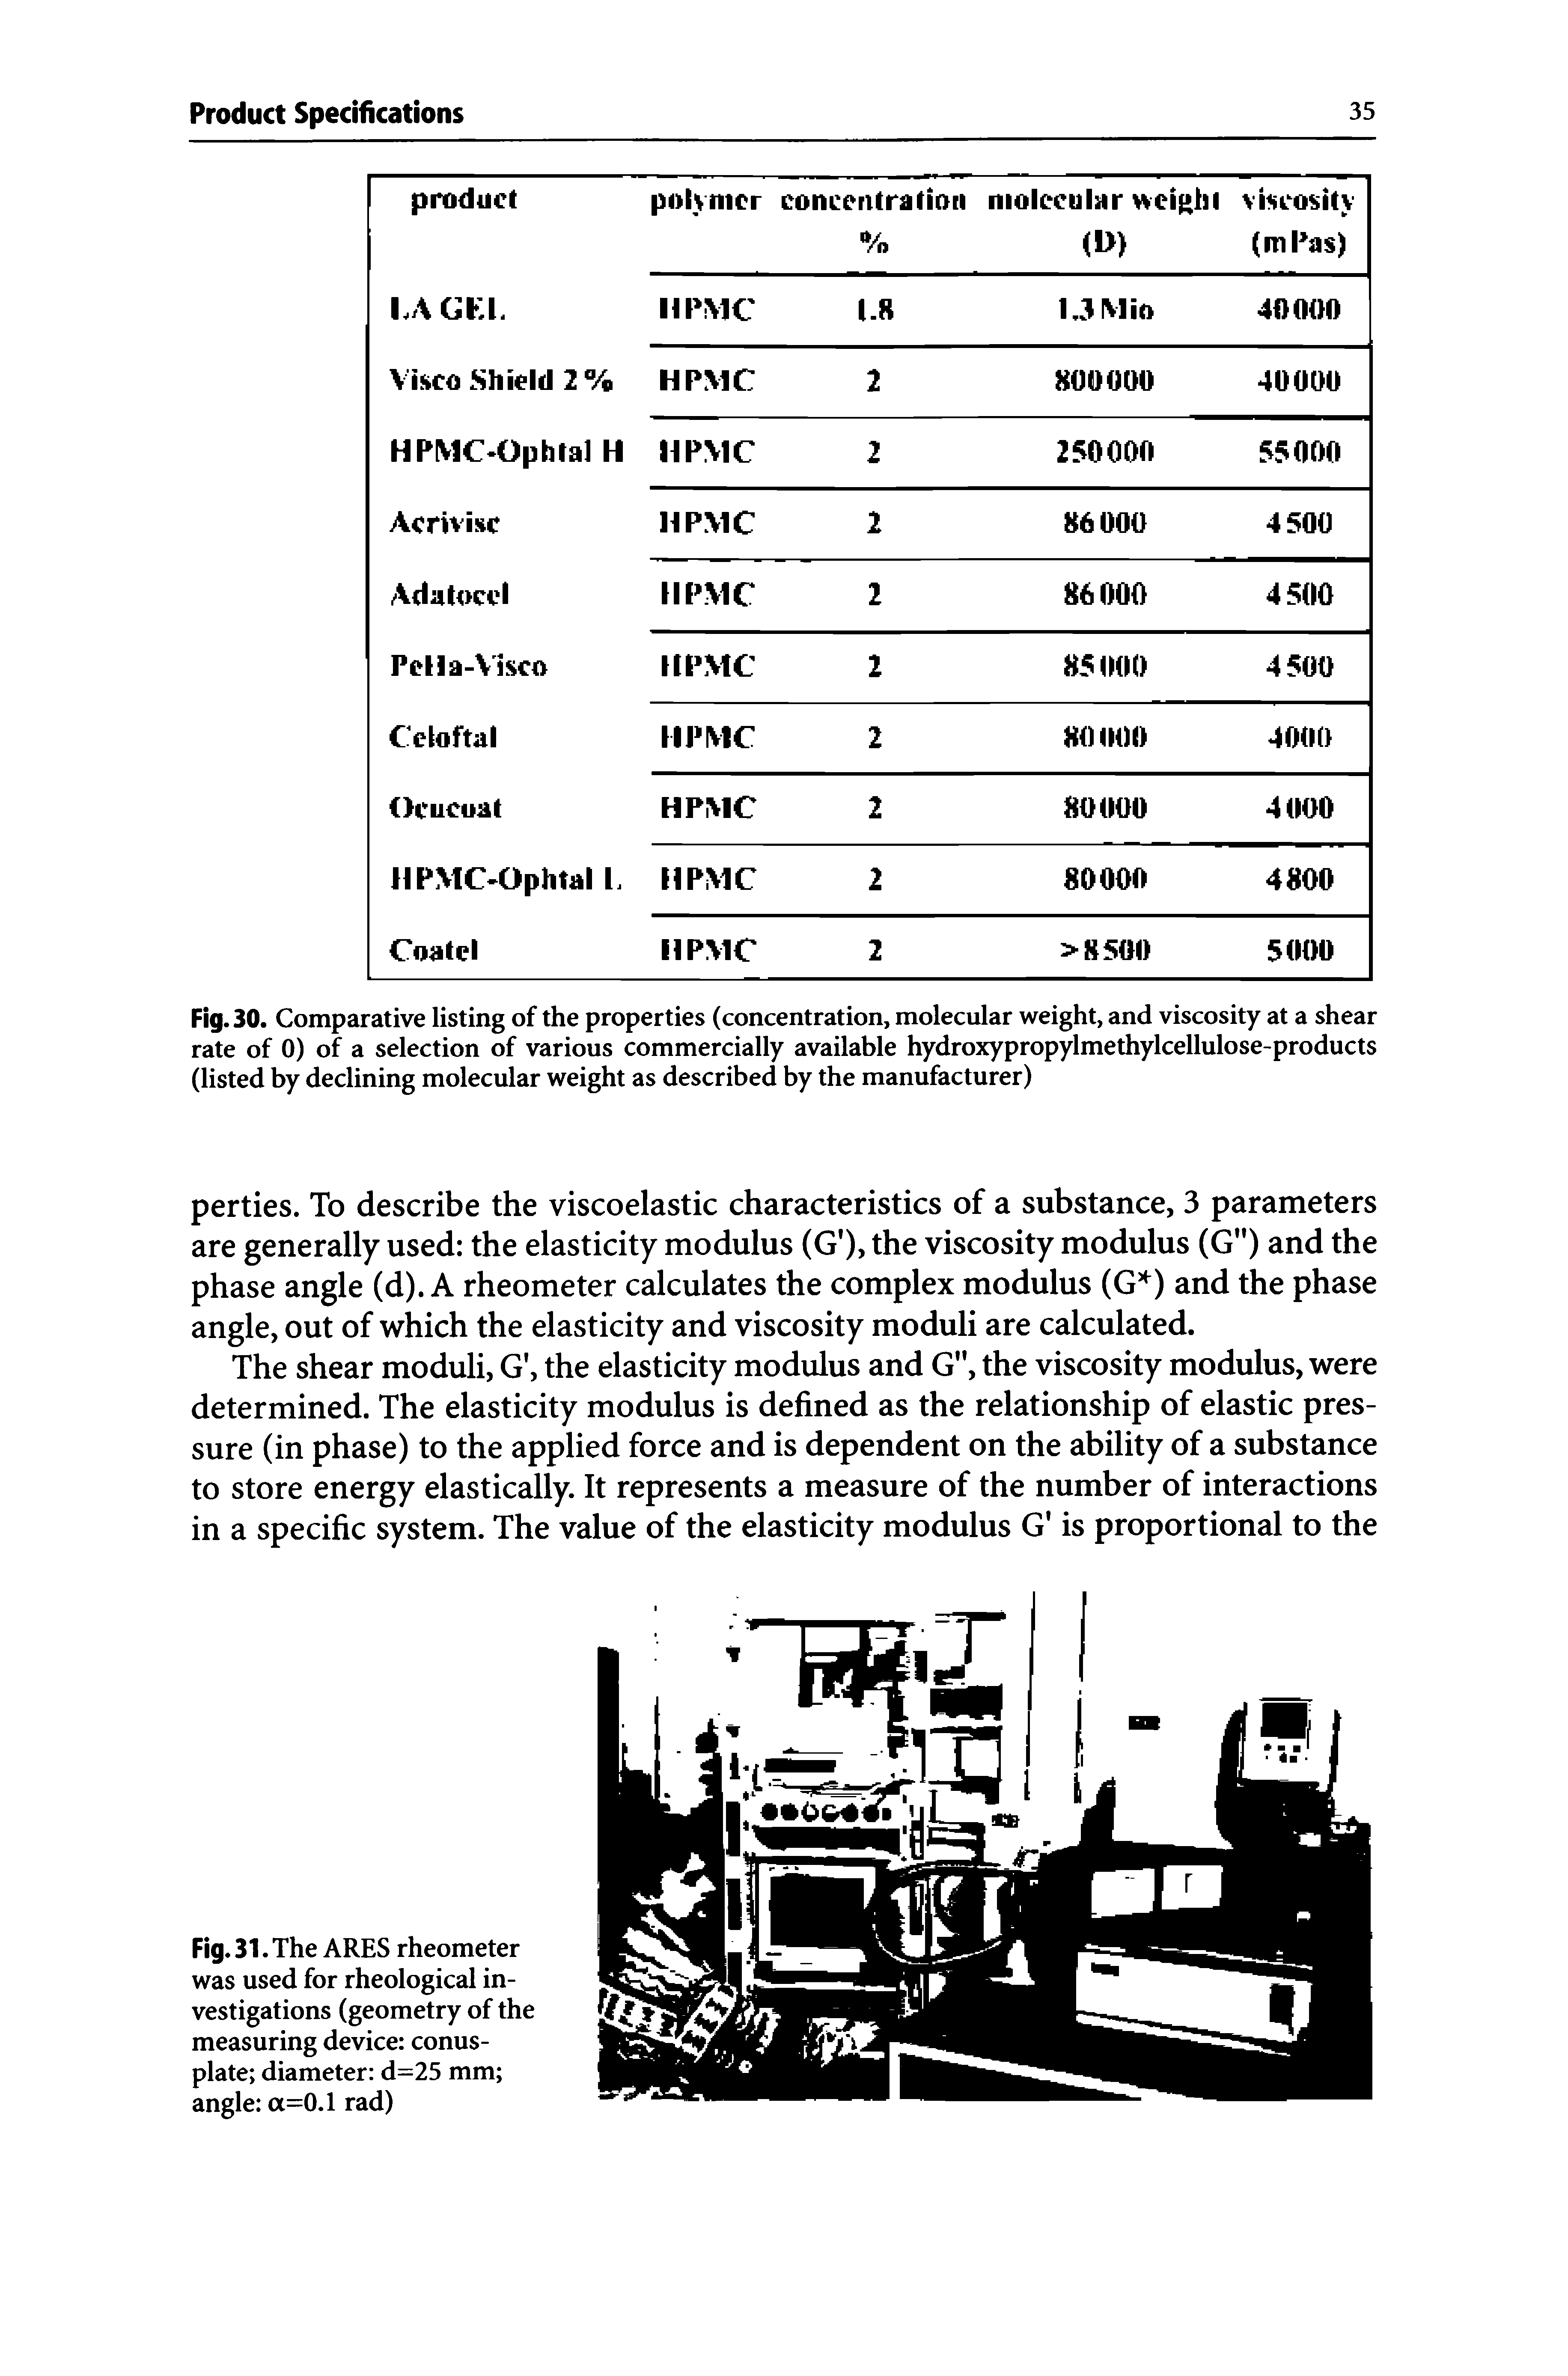 Fig. 31. The ARES rheometer was used for rheological investigations (geometry of the measuring device conus-plate diameter d=25 mm angle a=0.1 rad)...